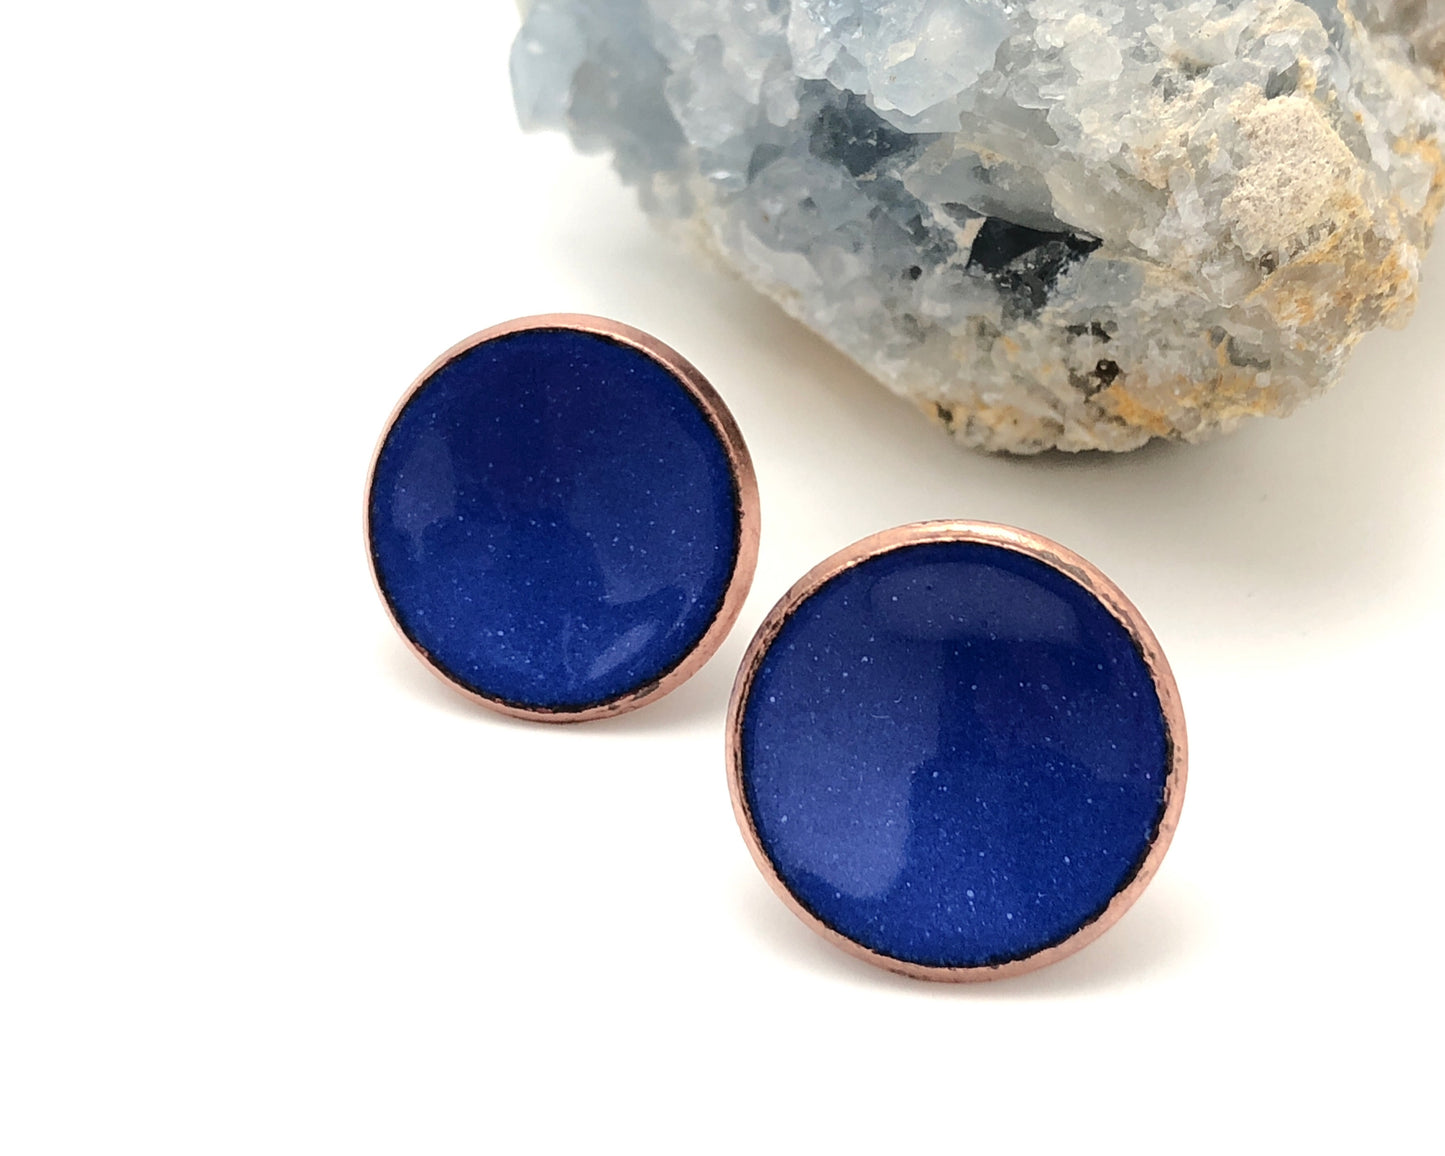 a pair of blue earrings sitting on top of a rock